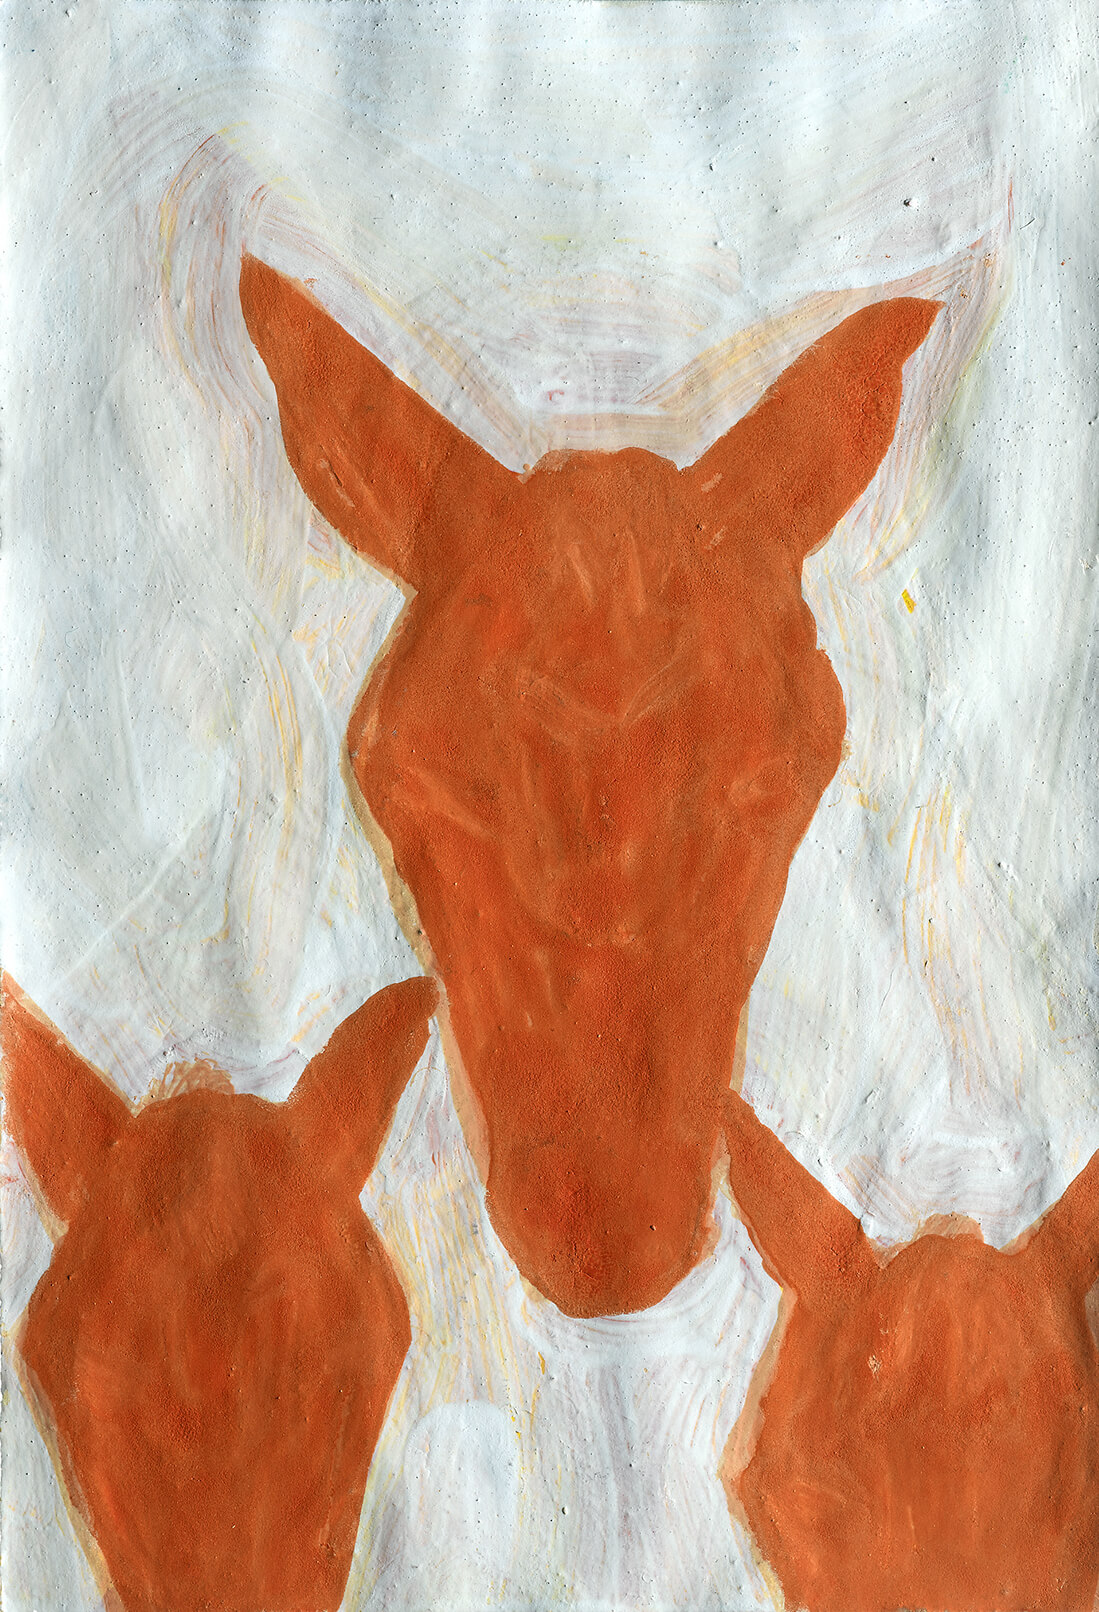 untitled (horse heads), 23 x 16 cm, egg tempera on paper, 2006